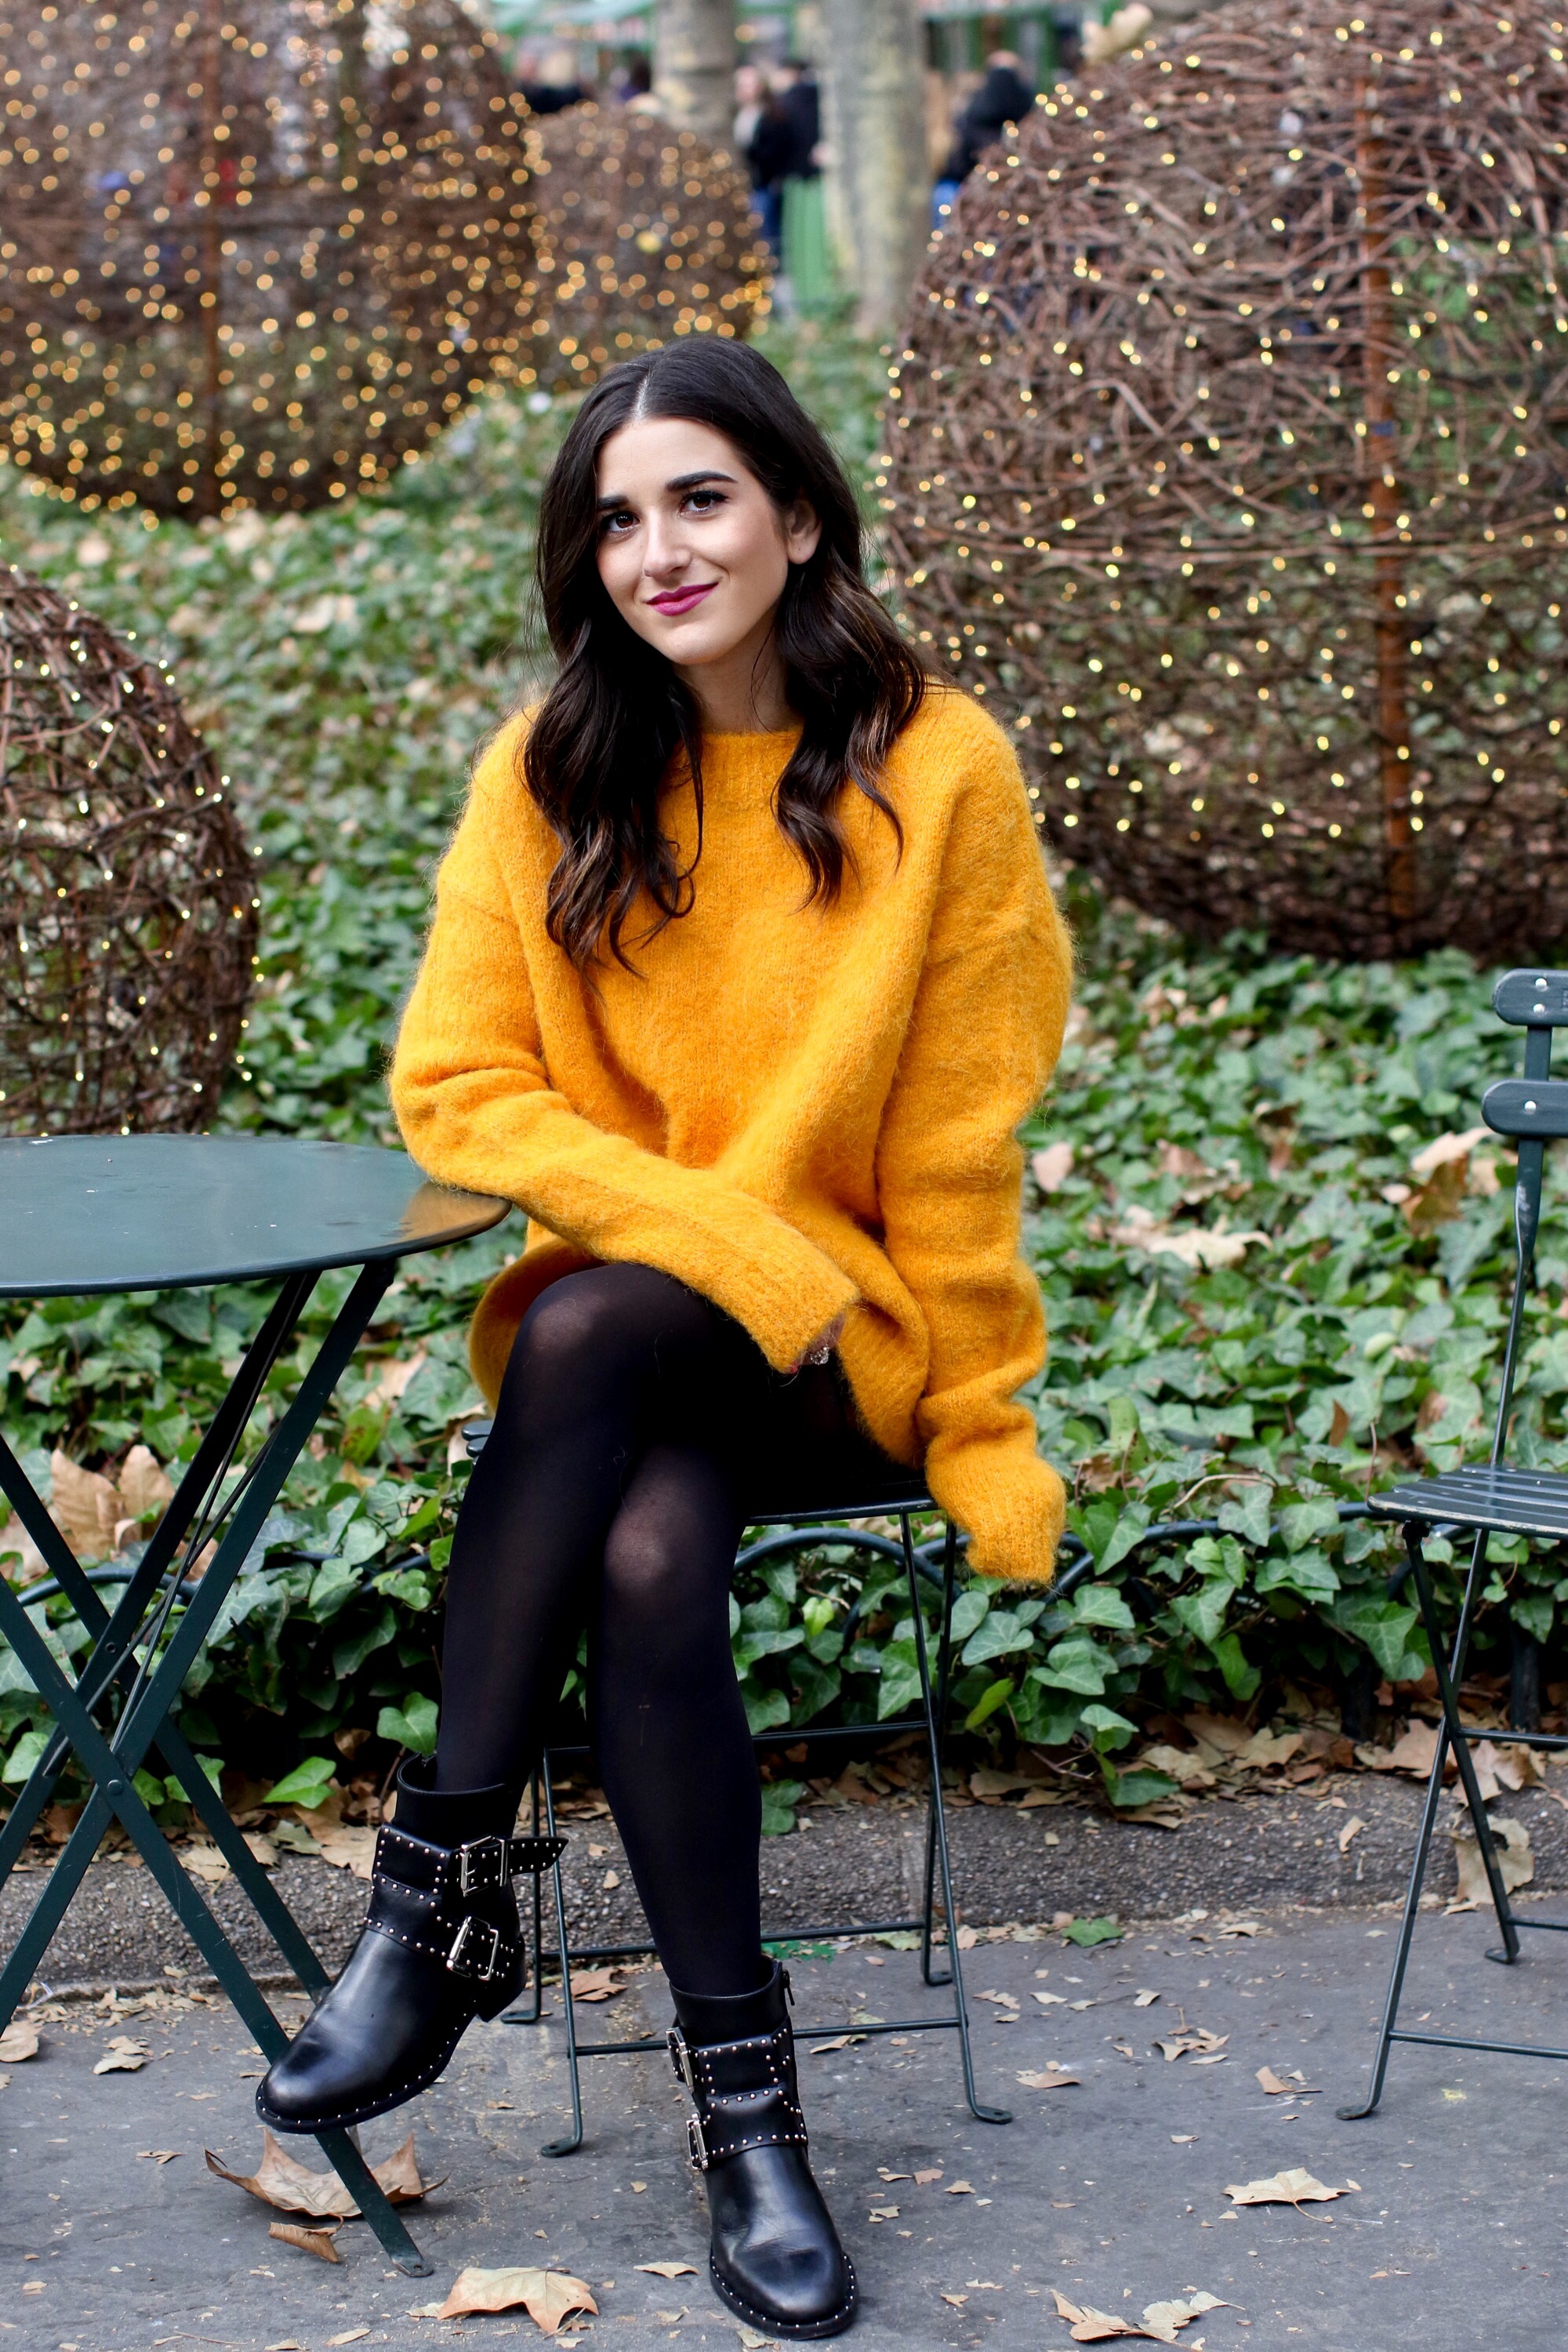 Yellow Sweater Pleather Skirt Why You Should Think Before You Unfollow Esther Santer Fashion Blog NYC Street Style Blogger Outfit OOTD Trendy Cozy Winter Look Girl Women Oversized Top New York City Instagram Tips DSW Studded Boots H&M  Topshop Details.jpg